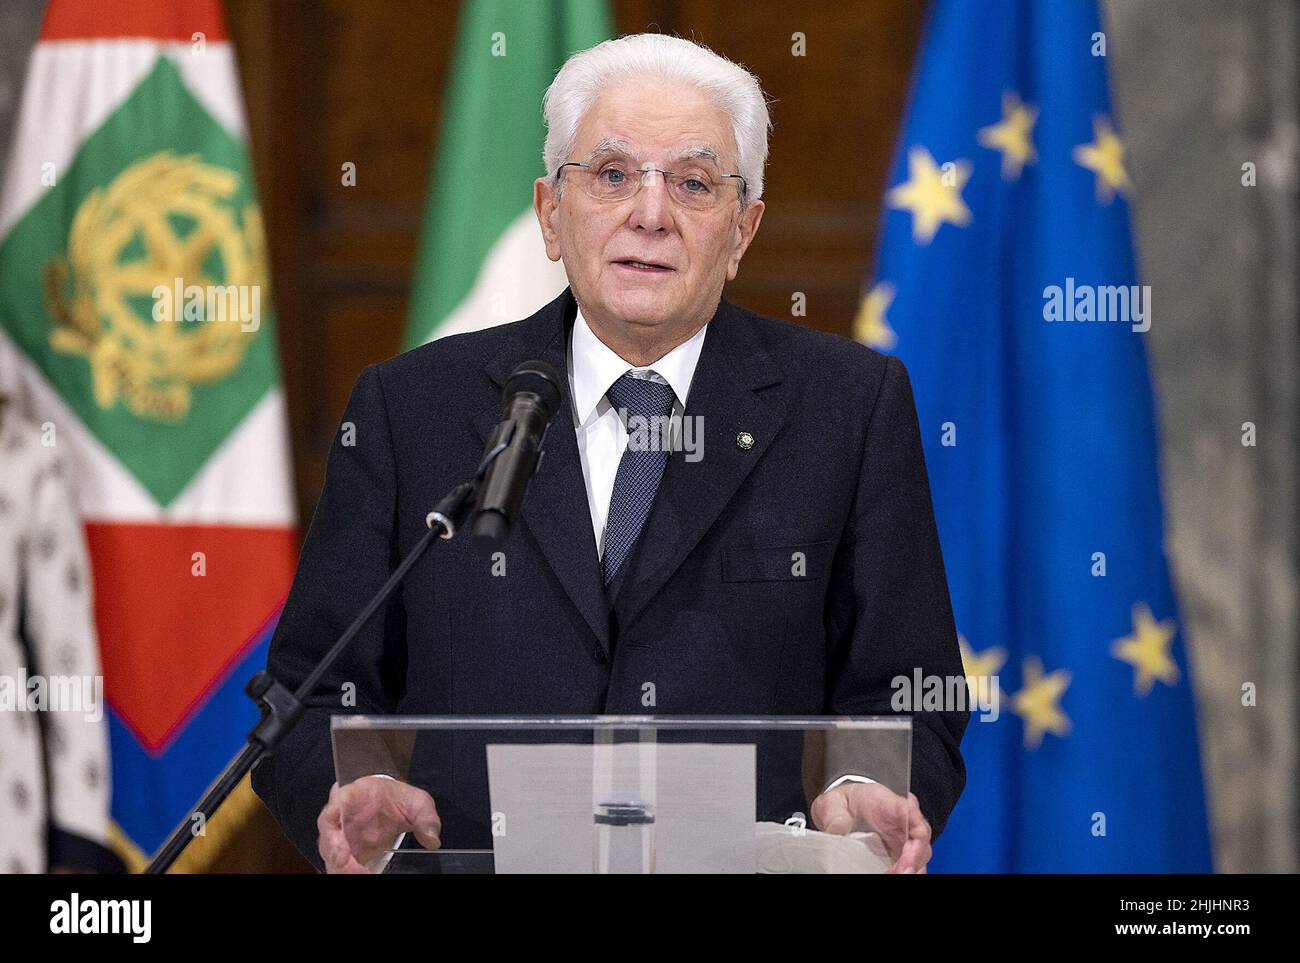 Sergio Matarella appears at the Quirinale Palace after his re-election for a second term in on January 29, 2022 in Rome, Italy. Sergio Mattarella, 80, agrees to serve a second seven-year term after political parties fail to find an acceptable alternative. Behind him : The Presidente of the Senate Maria Elisabetta Alberti Casellati and the Presidente of the Chamber of Deputies Roberto Fico. Photo by ABACAPRESS.COM Stock Photo